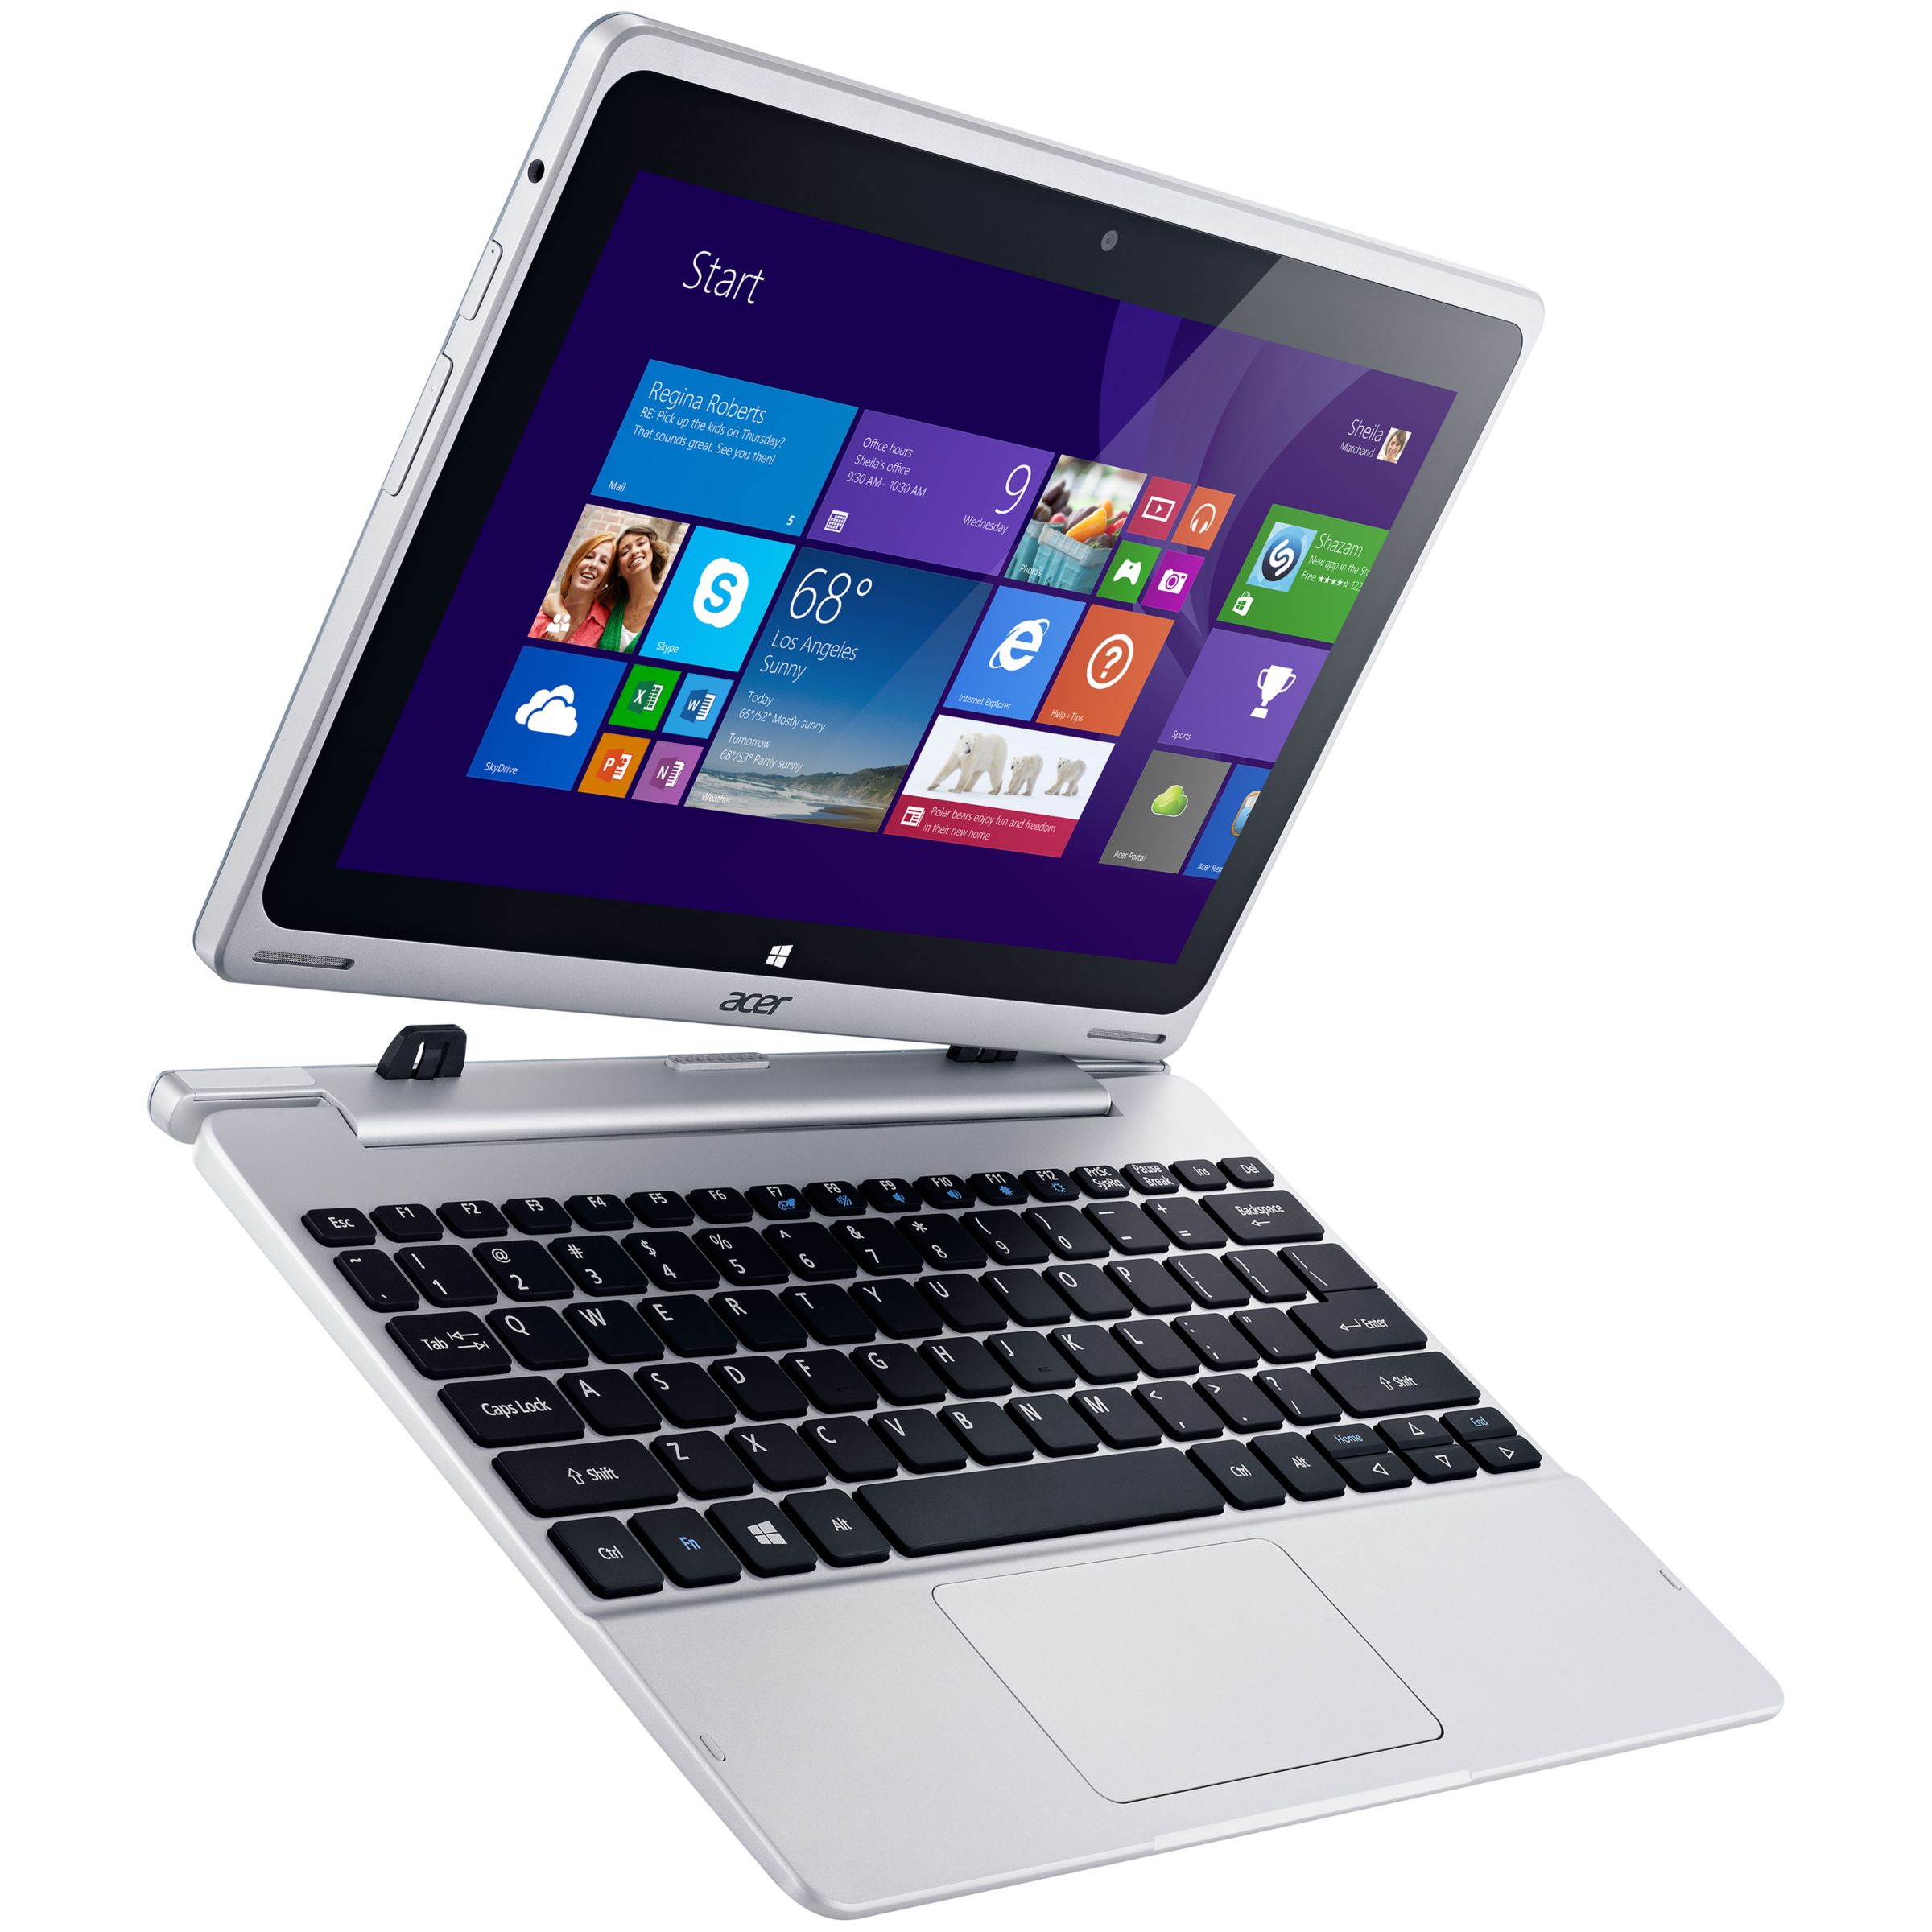 Acer Aspire Switch 10 Convertible Tablet Laptop Intel 